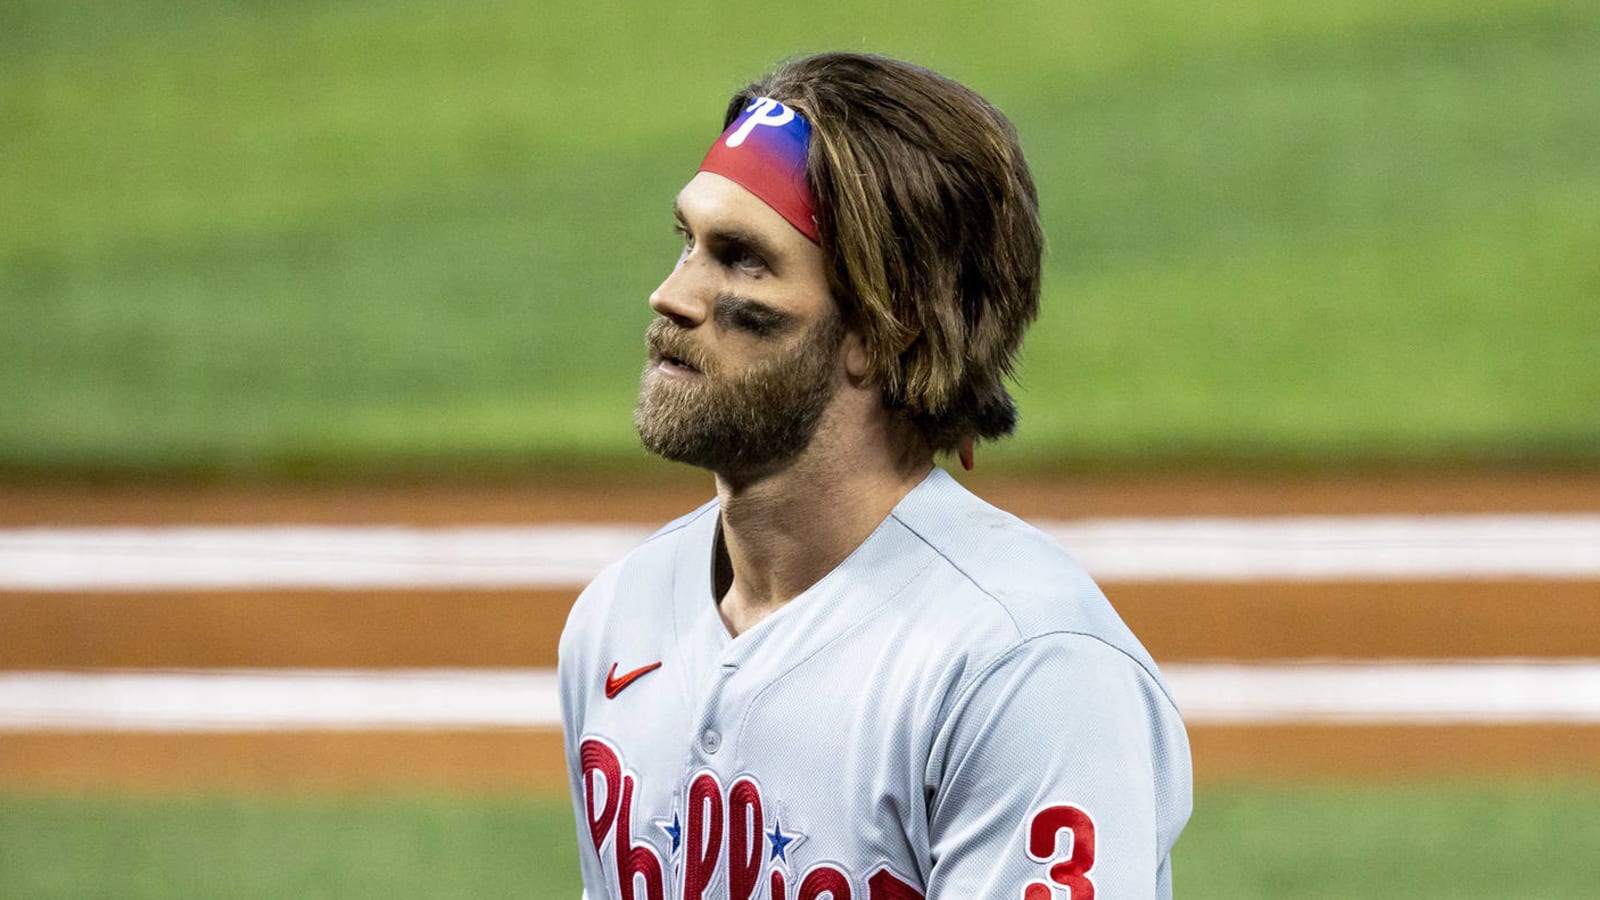 Bryce Harper leaves game after being hit by pitch